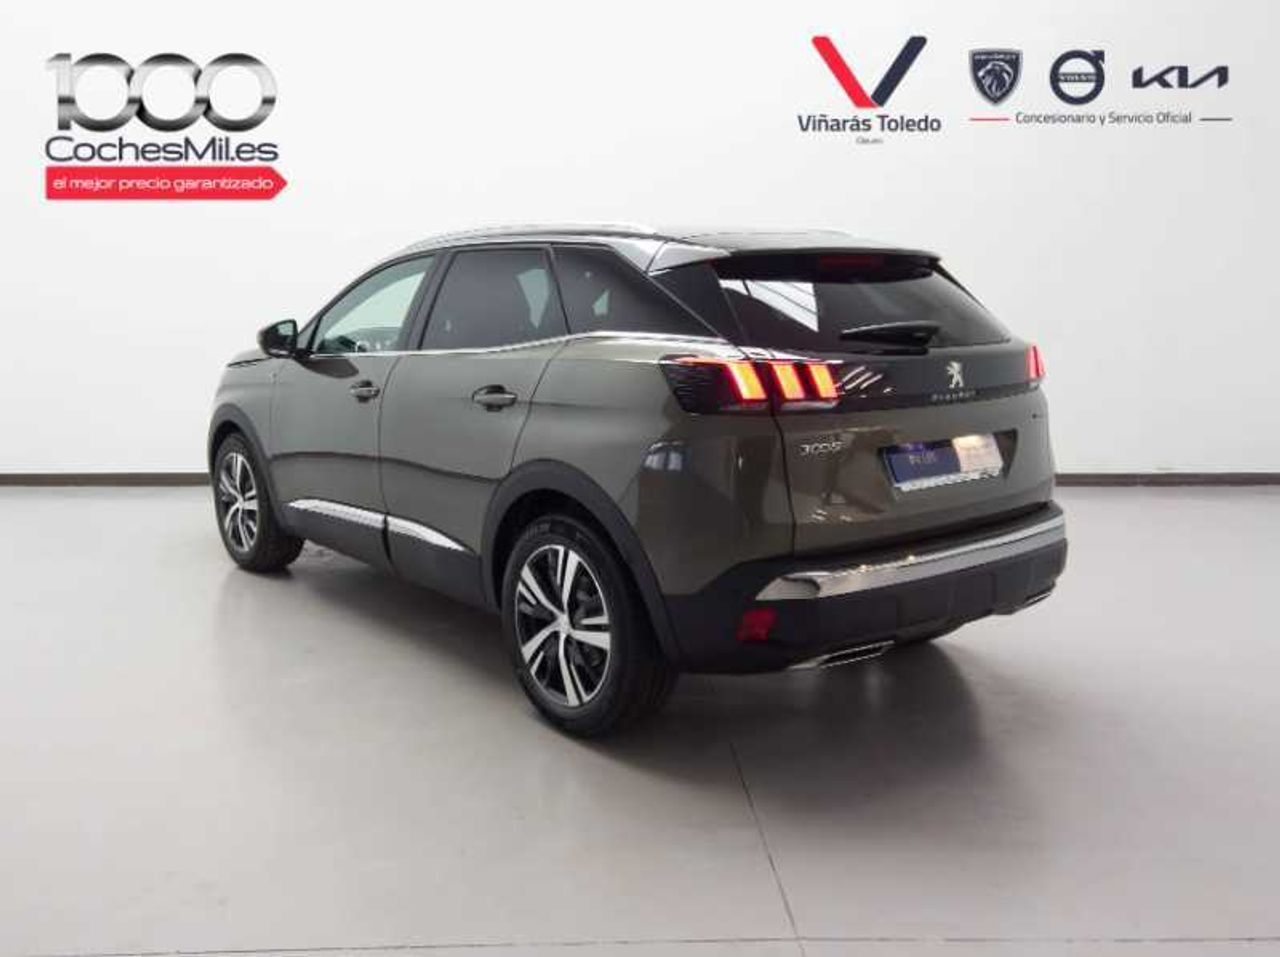 Peugeot 3008 SUV  GT-Line BlueHDi 130 S&S EAT8 ?6.2 (Solo stock) 3